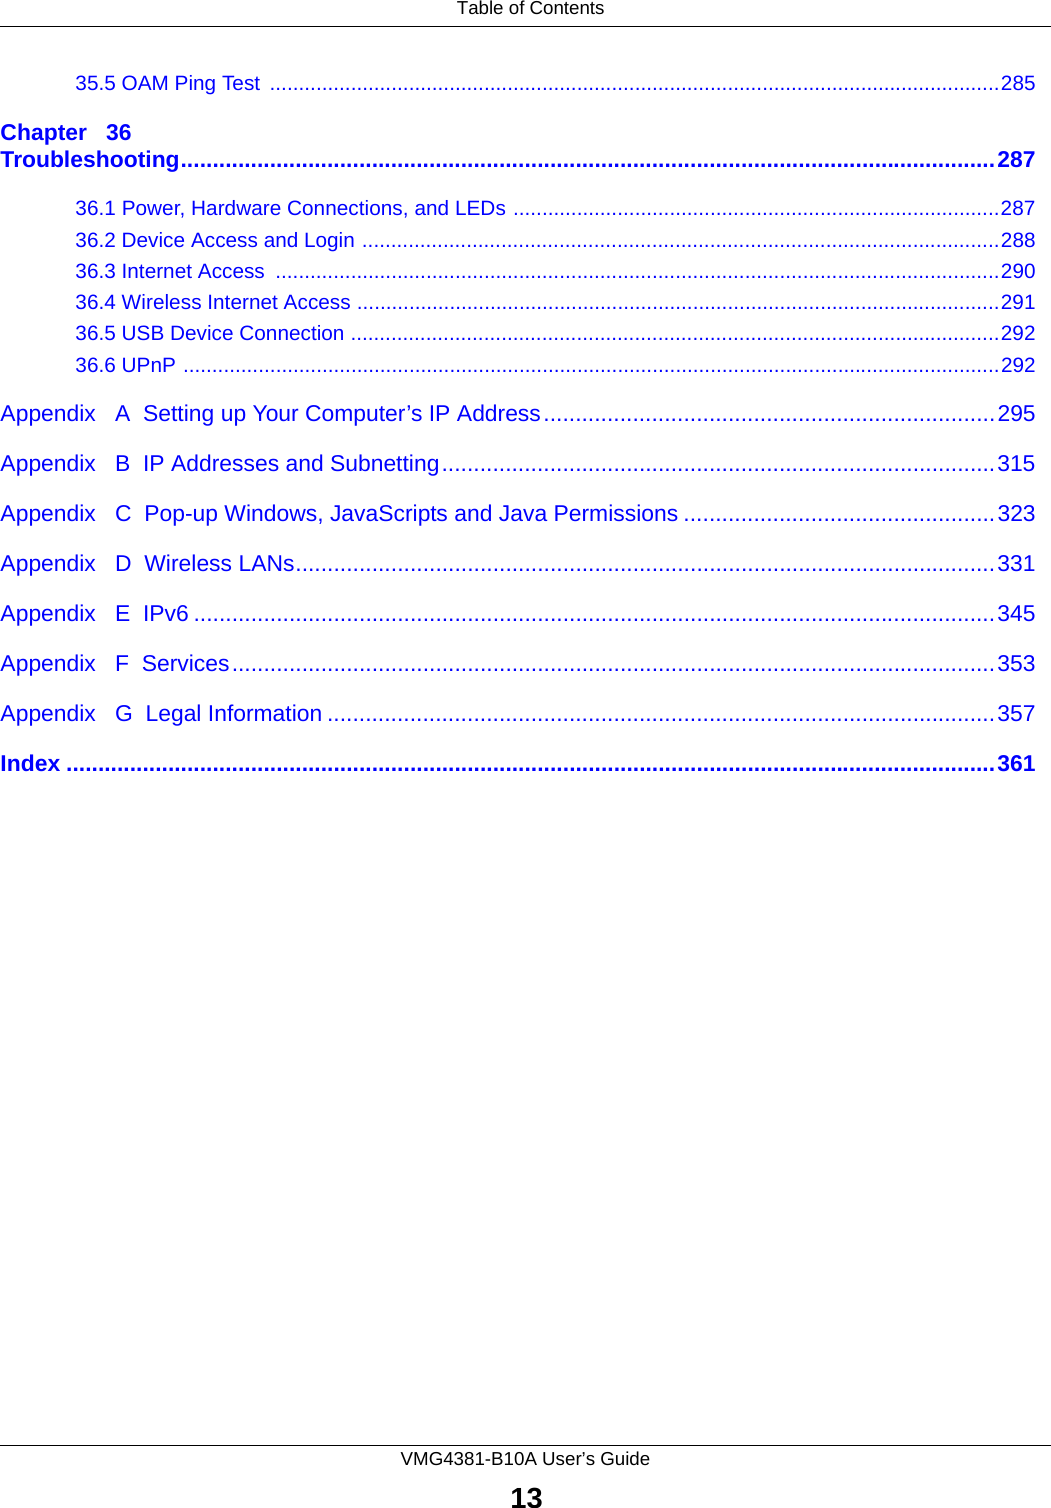  Table of ContentsVMG4381-B10A User’s Guide1335.5 OAM Ping Test  ..............................................................................................................................285Chapter   36Troubleshooting................................................................................................................................28736.1 Power, Hardware Connections, and LEDs ....................................................................................28736.2 Device Access and Login ..............................................................................................................28836.3 Internet Access  .............................................................................................................................29036.4 Wireless Internet Access ...............................................................................................................29136.5 USB Device Connection ................................................................................................................29236.6 UPnP .............................................................................................................................................292Appendix   A  Setting up Your Computer’s IP Address.......................................................................295Appendix   B  IP Addresses and Subnetting.......................................................................................315Appendix   C  Pop-up Windows, JavaScripts and Java Permissions .................................................323Appendix   D  Wireless LANs..............................................................................................................331Appendix   E  IPv6 ..............................................................................................................................345Appendix   F  Services........................................................................................................................353Appendix   G  Legal Information .........................................................................................................357Index ..................................................................................................................................................361